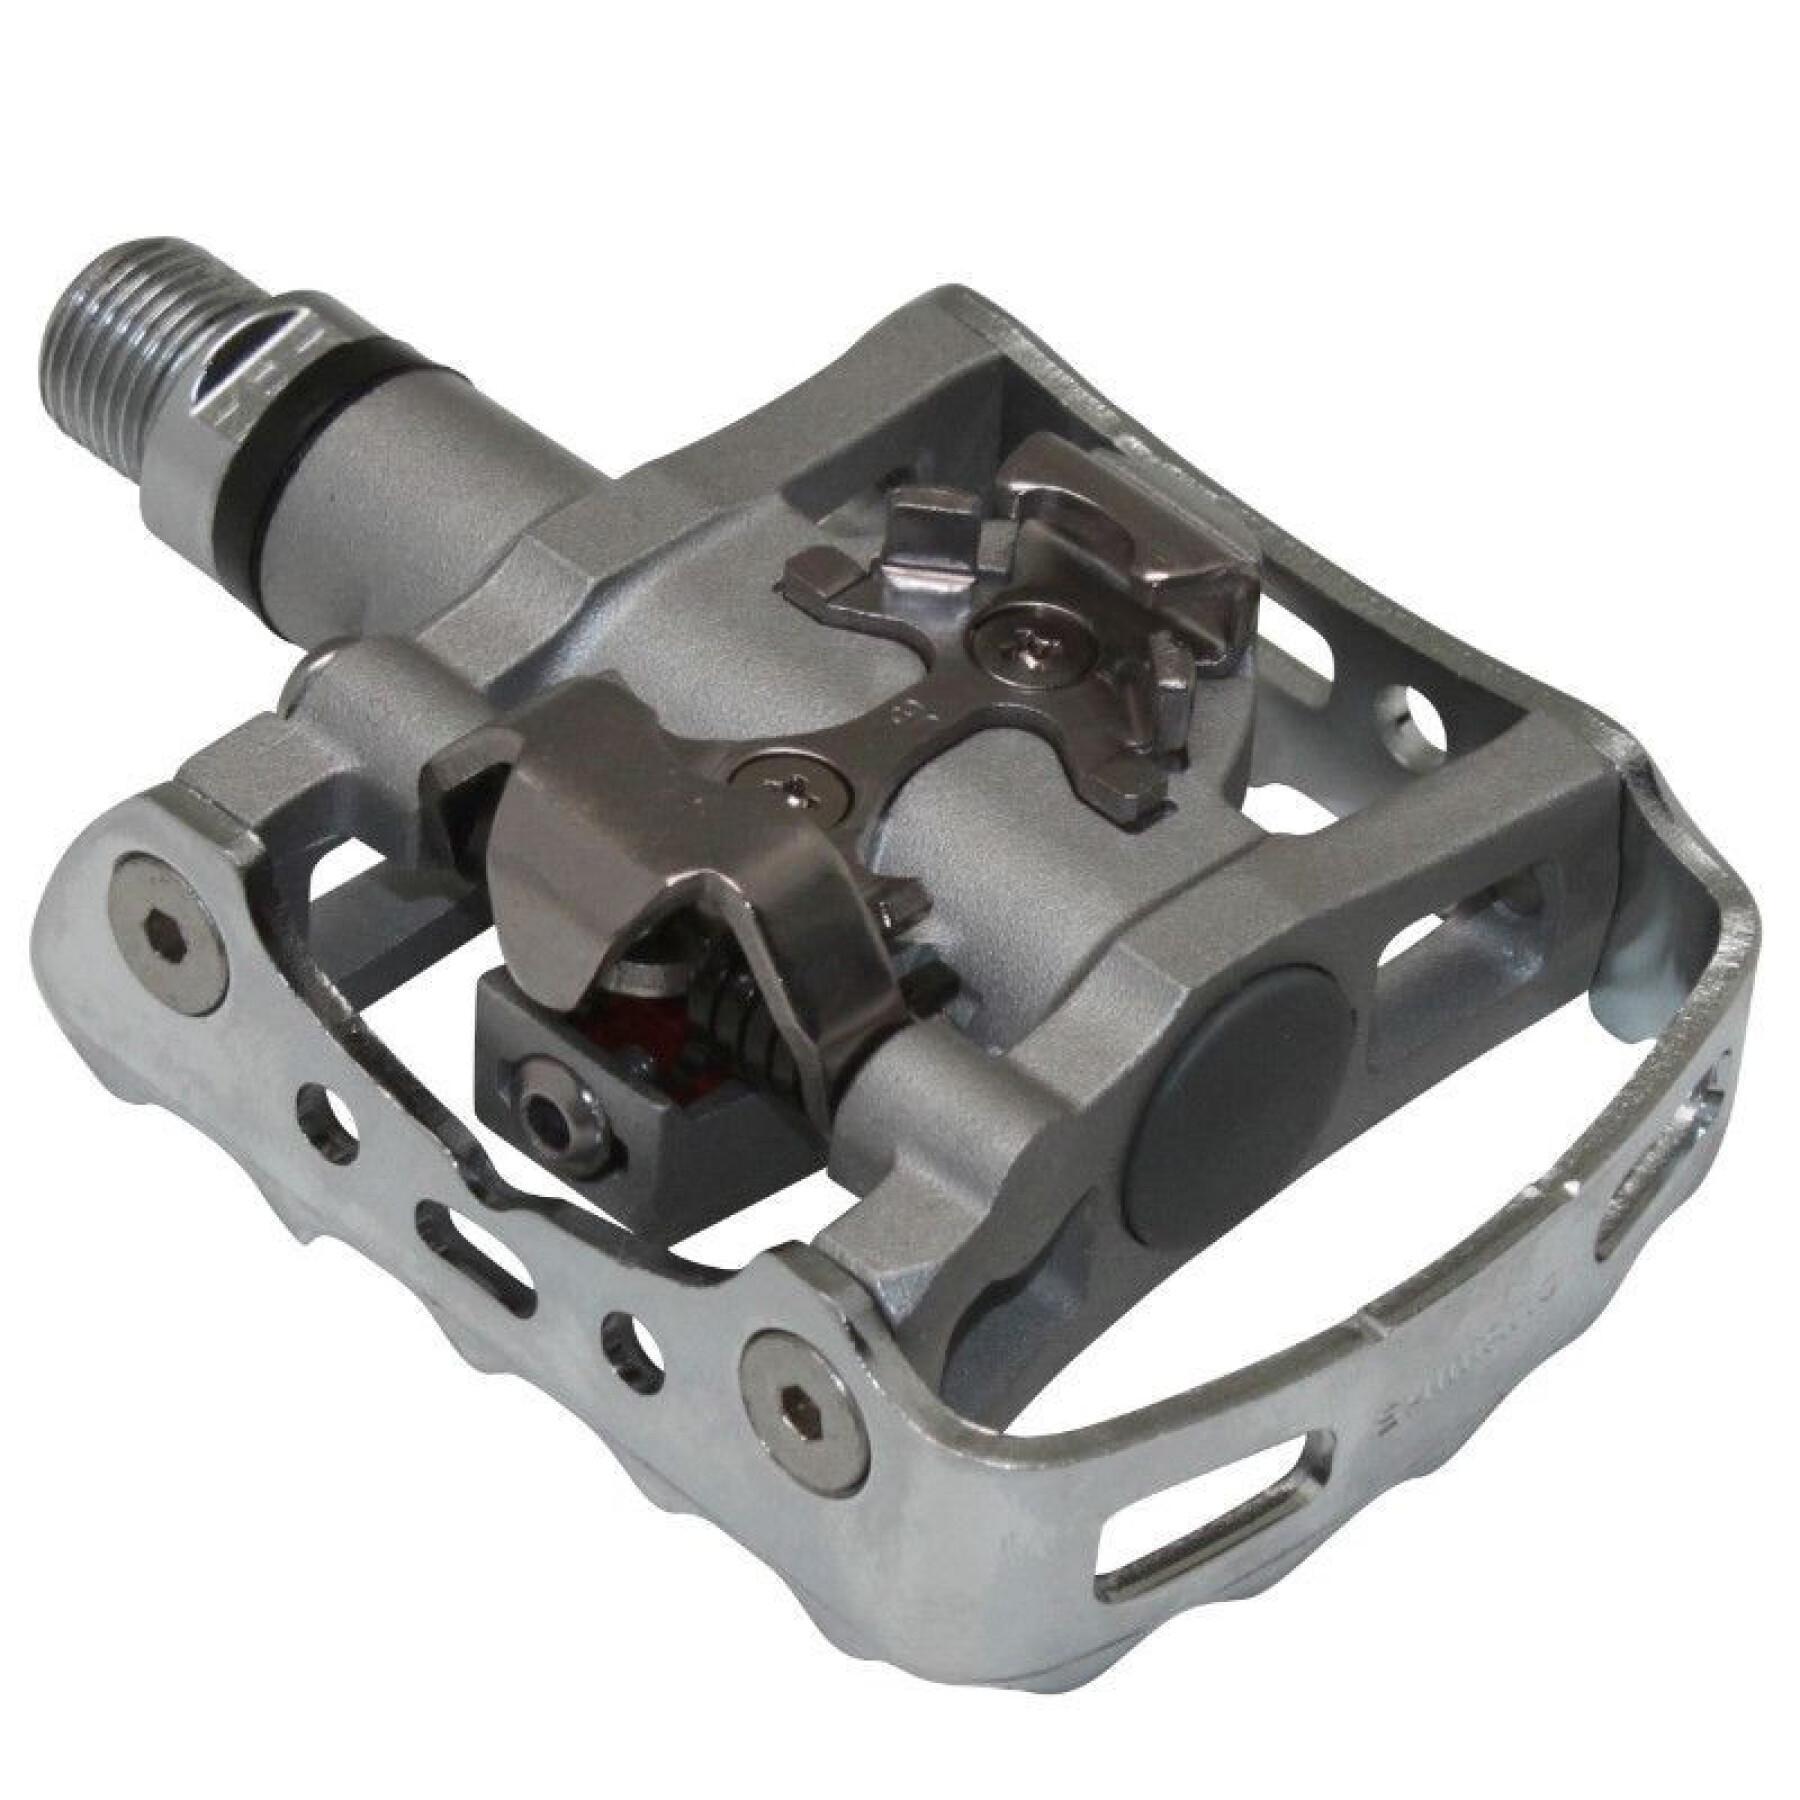 Multipurpose automatic pedals with cleats Shimano M324 face auto SPD- standard